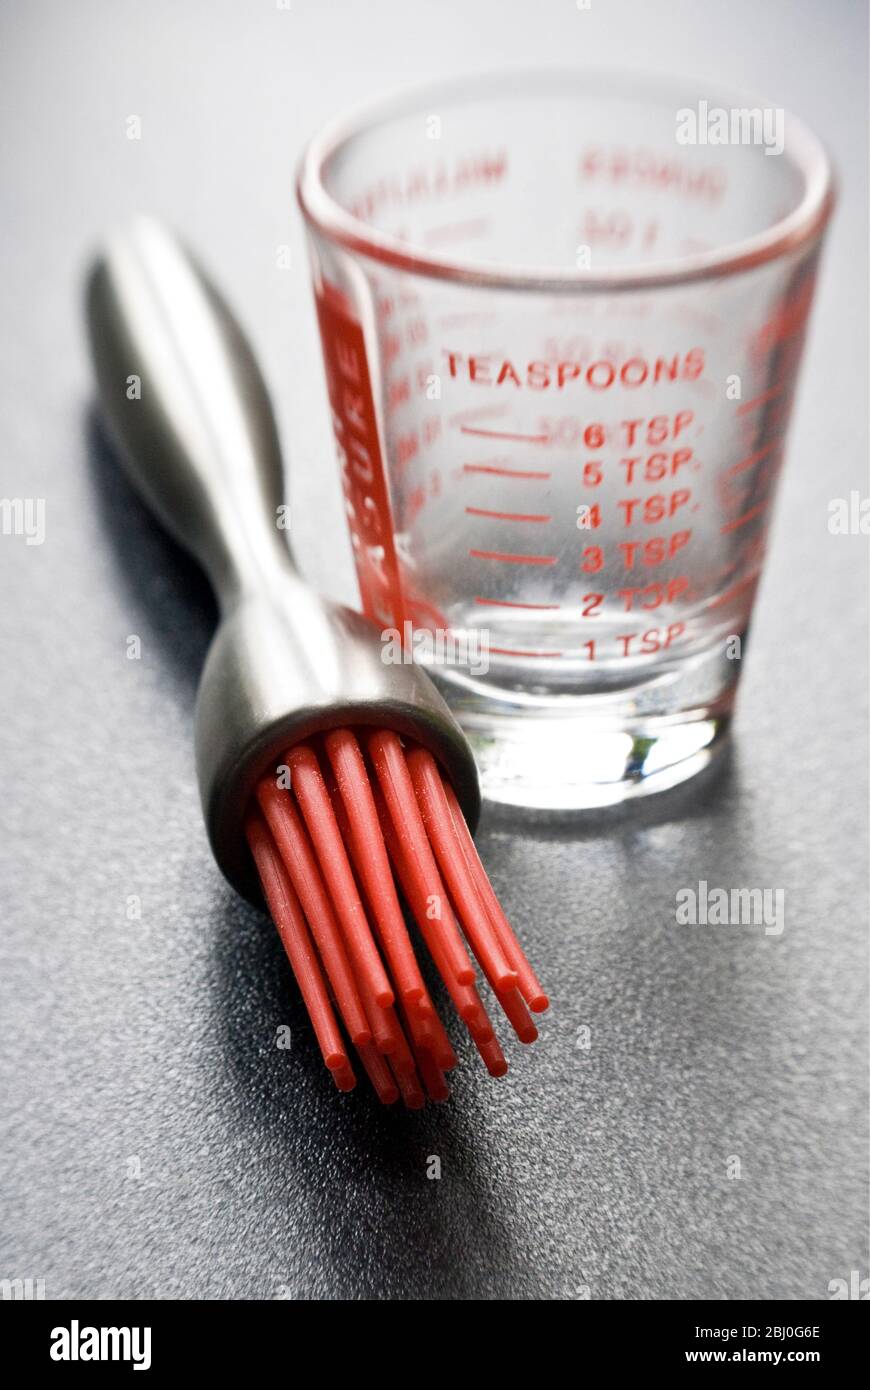 Modern pastry brush with red silicone 'bristles' with a little measuring glass on dark textured surface - Stock Photo